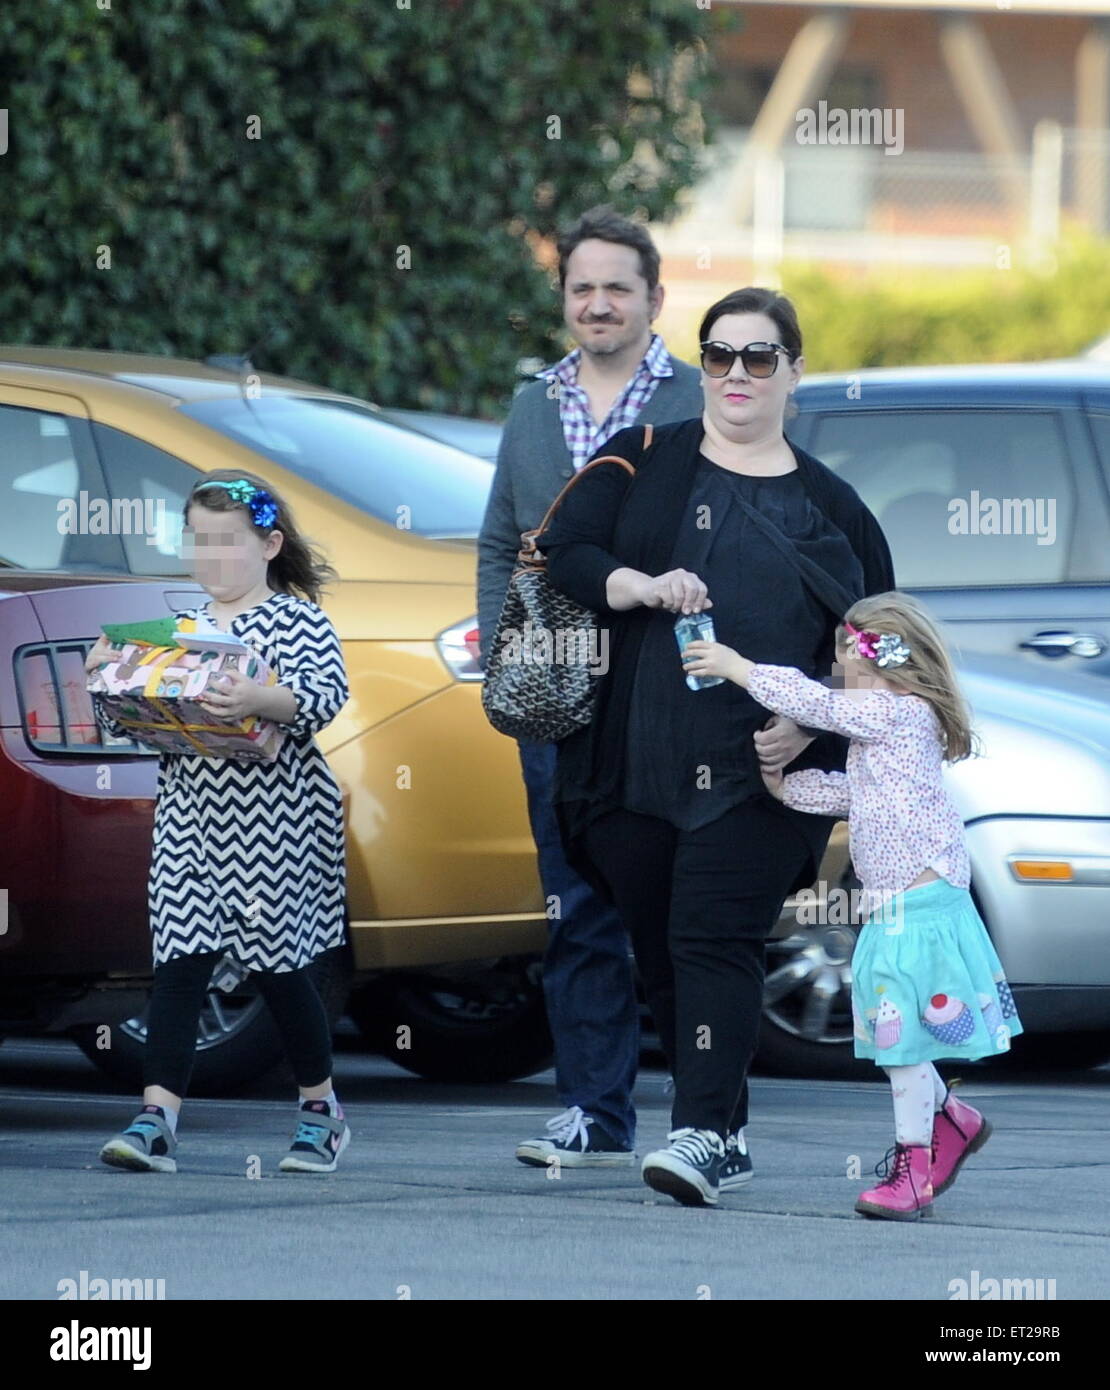 Melissa McCarthy and husband Ben Falcone take their daughters Vivian and Georgette to a birthday party at Pickwick Bowling Alley  Featuring: Melissa McCarthy,Ben Falcone,Vivian Falcone,Georgette Falcone Where: Burbank, California, United States When: 06 Dec 2014 Credit: Cousart/JFXimages/WENN.com Stock Photo